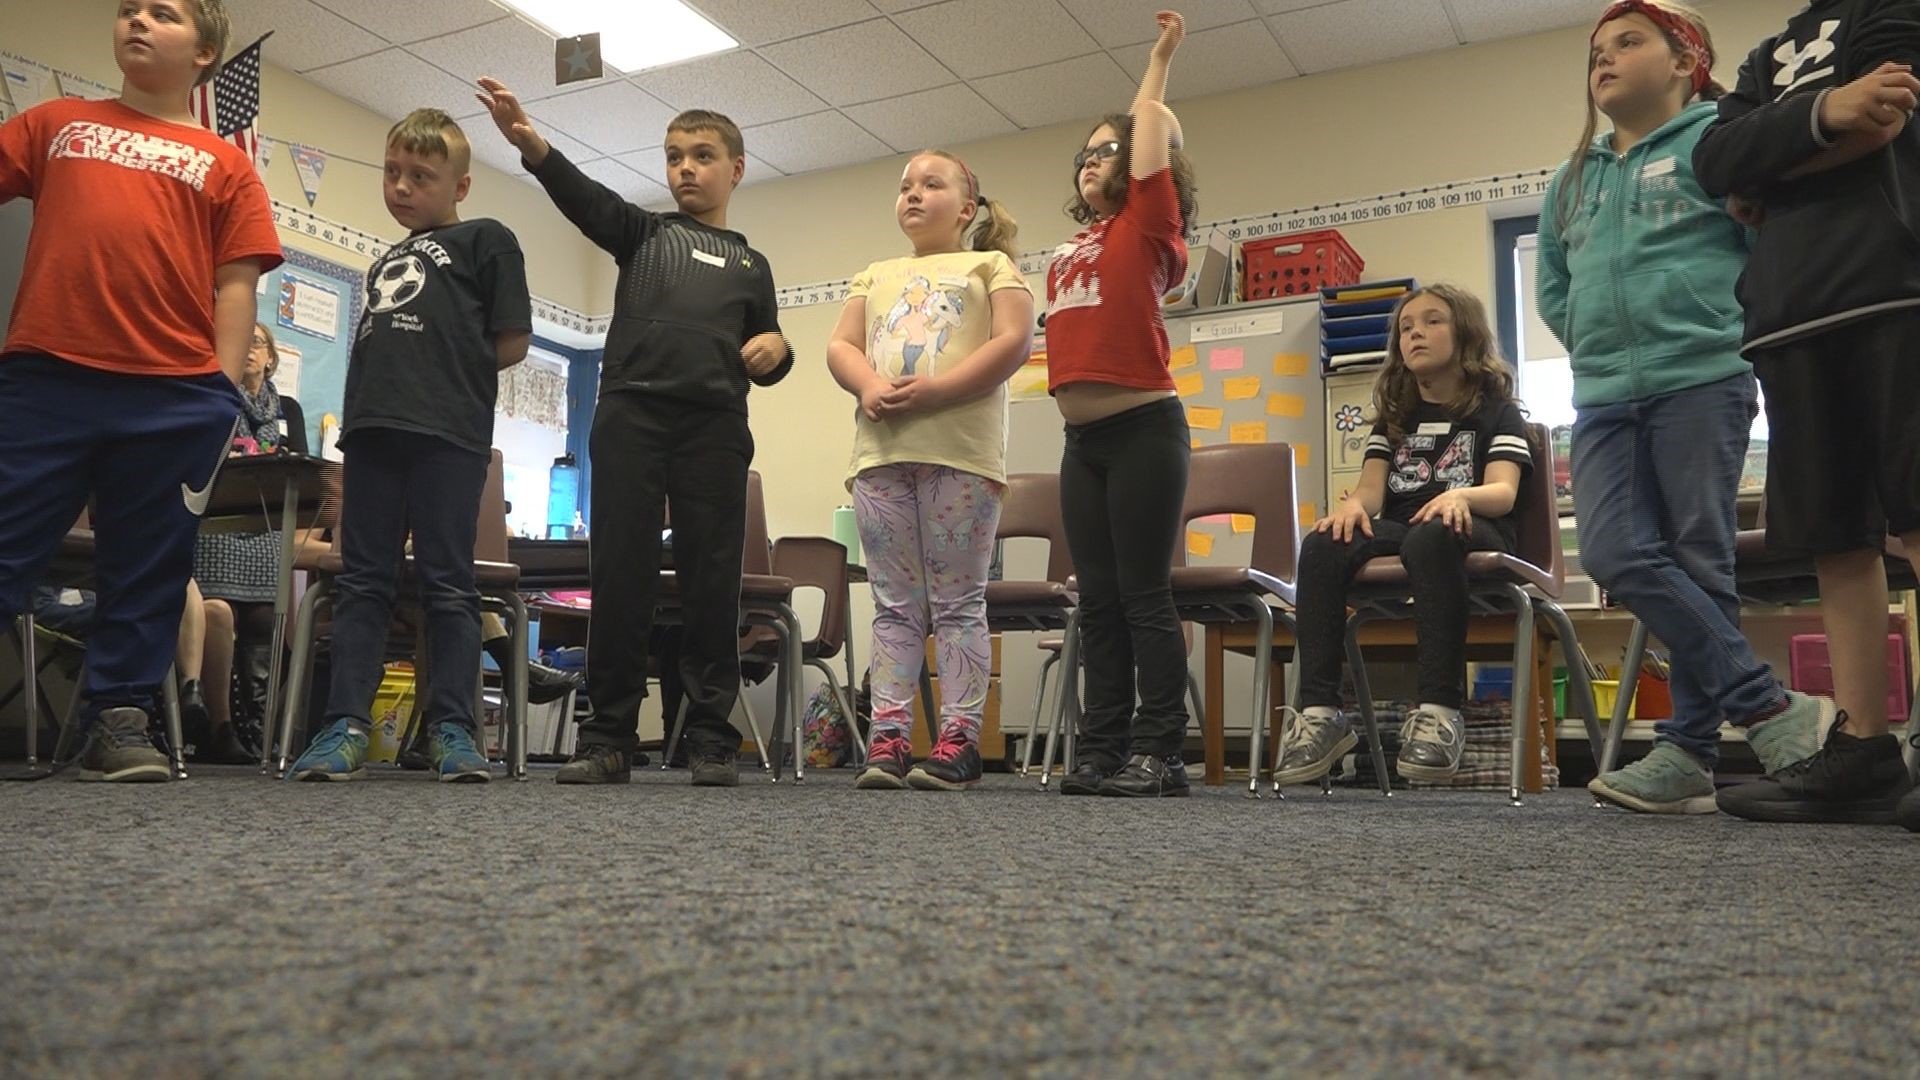 The Cromwell Center is working to teach thousands of Maine kids about inclusion in elementary schools across the state.